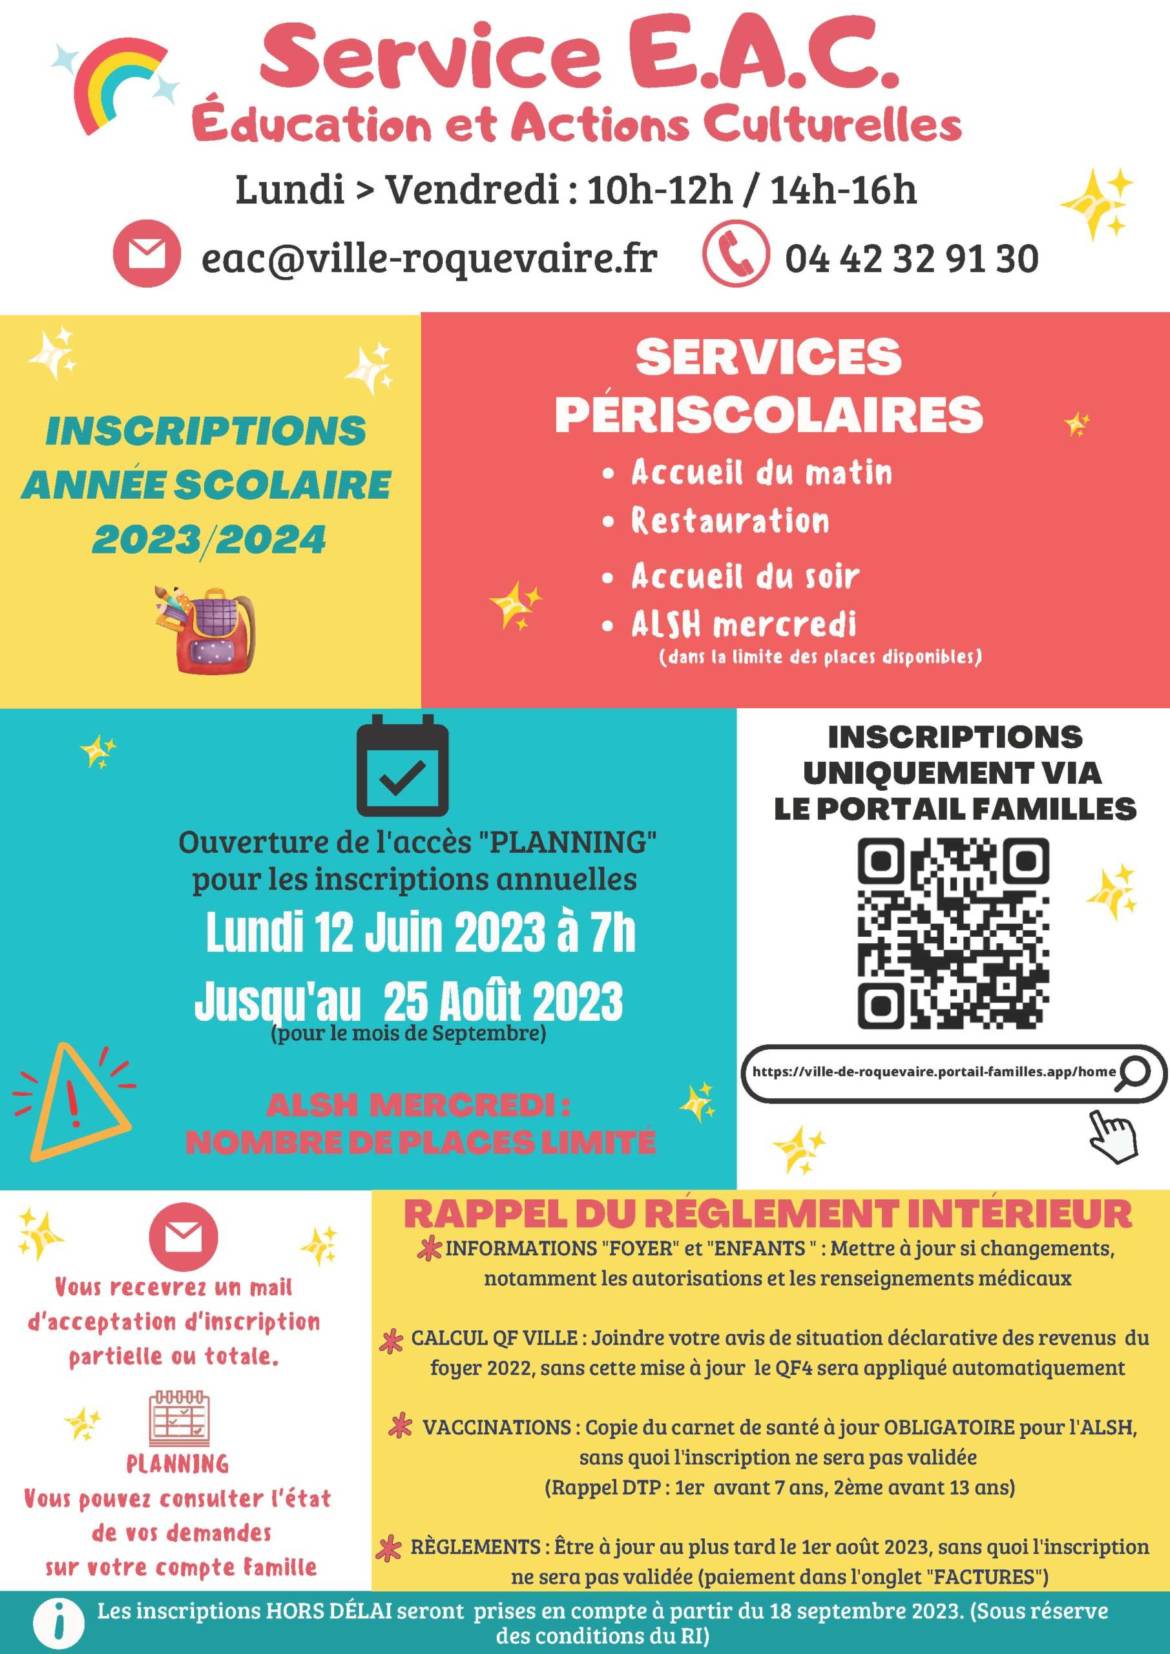 2023-2024-Inscriptions-scolaires-EAC-scaled.jpg